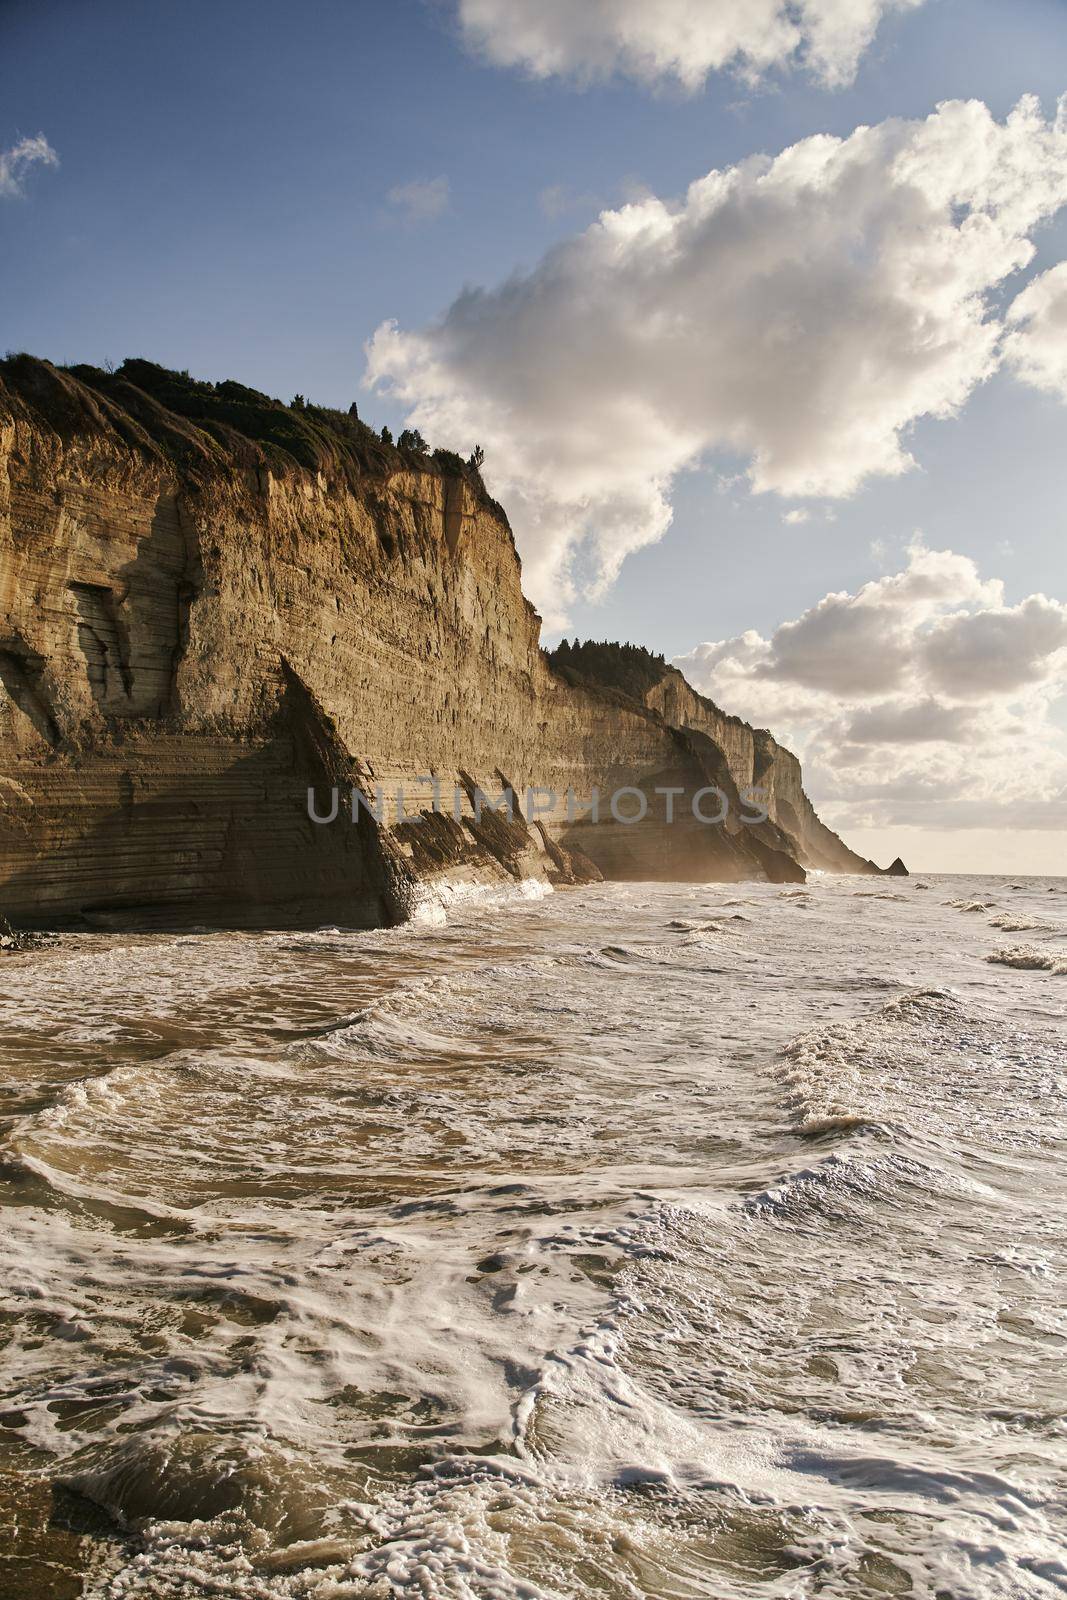 View of Logas Beach and the amazing rocky cliff in Peroulades. Corfu island. Greece.